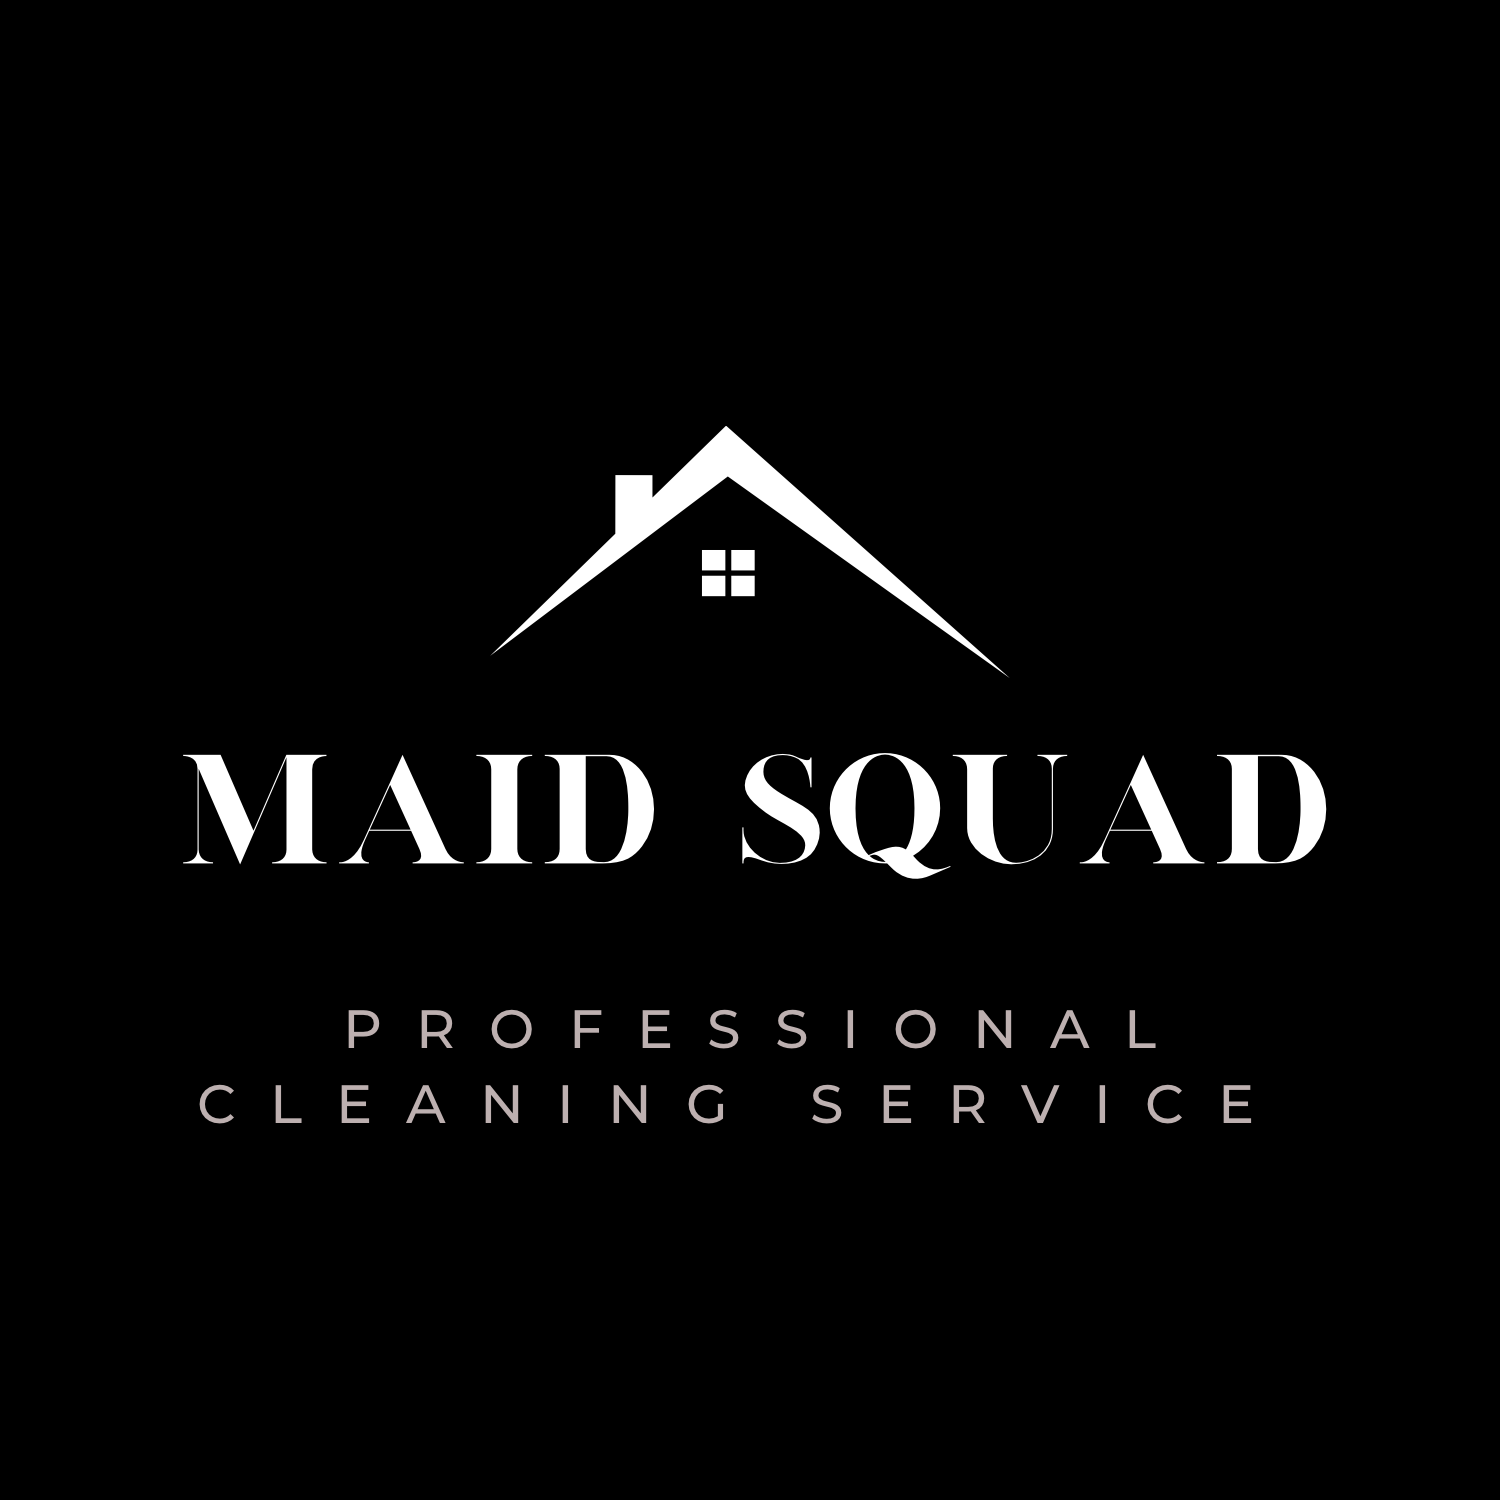 Maid Squad Cleaning Service Logo